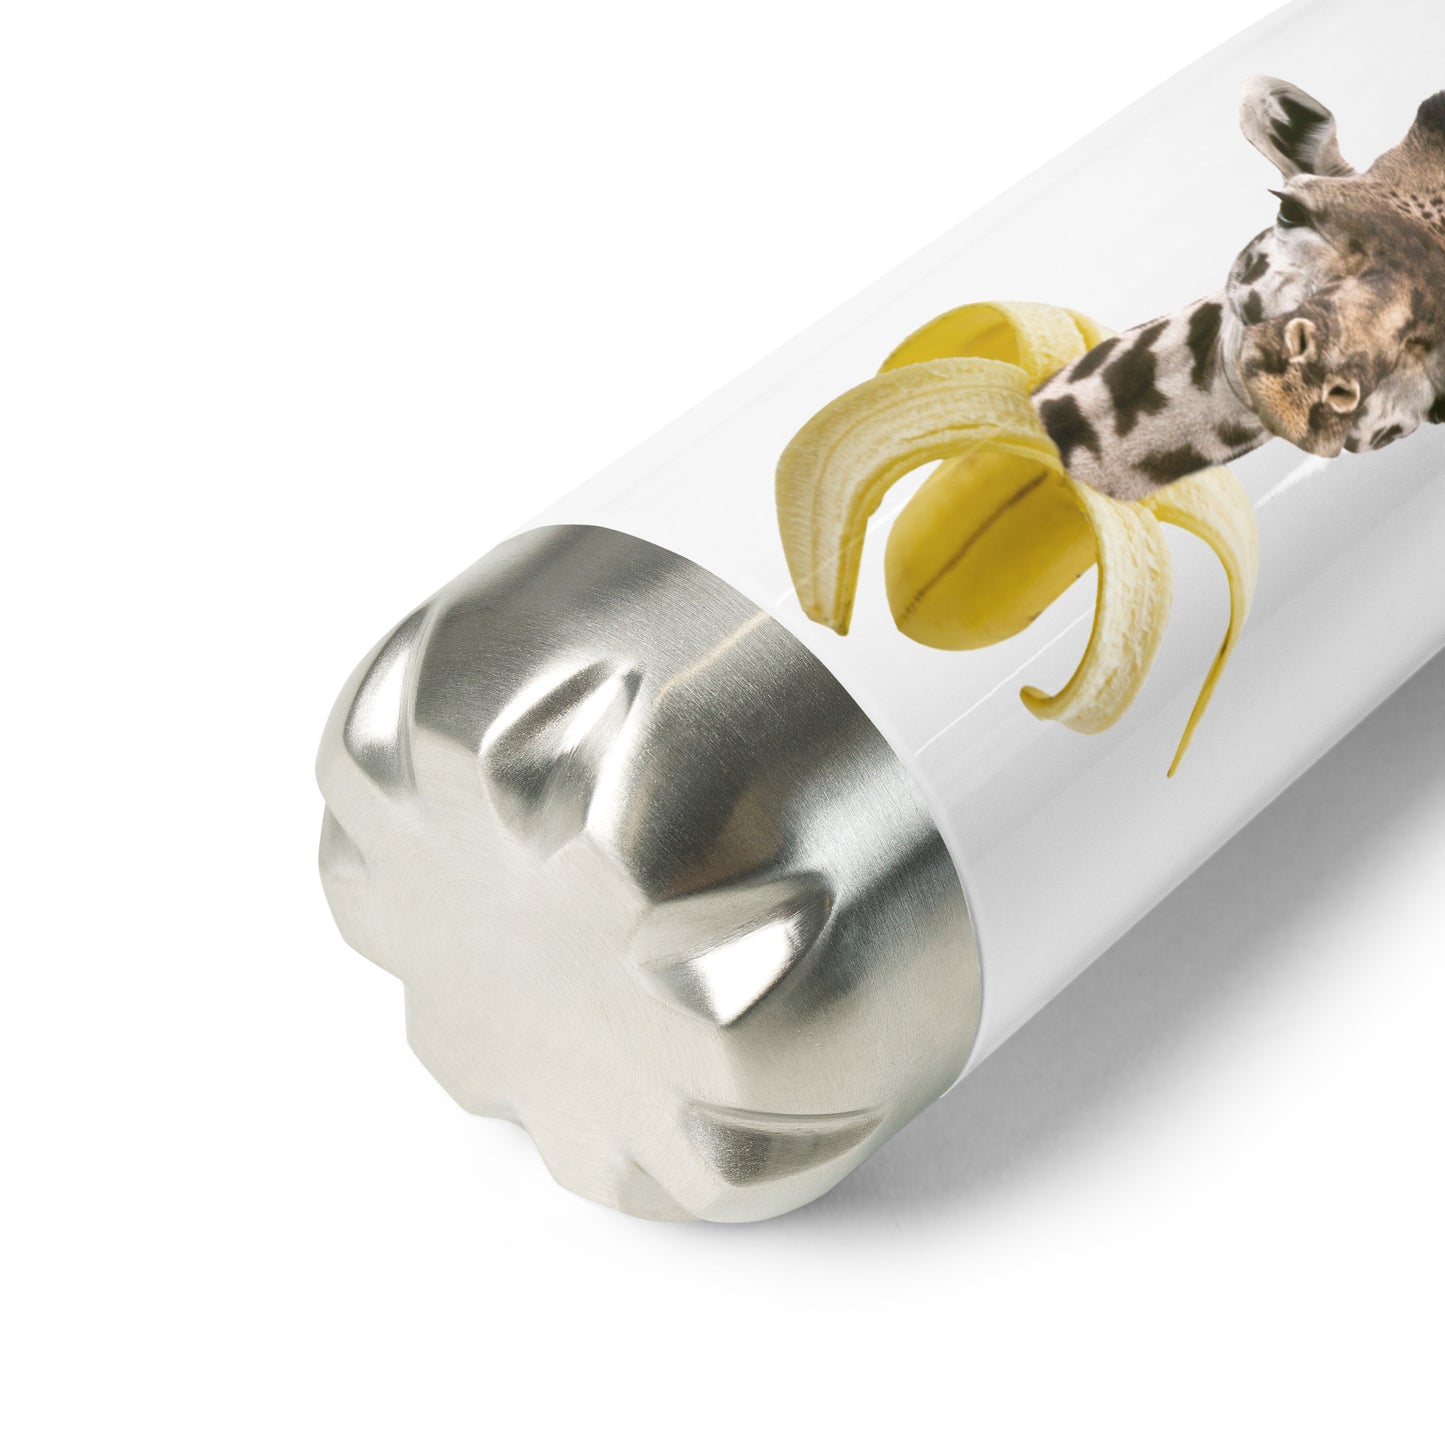 Stainless Steel Water Bottle with Giraffe in a banana design